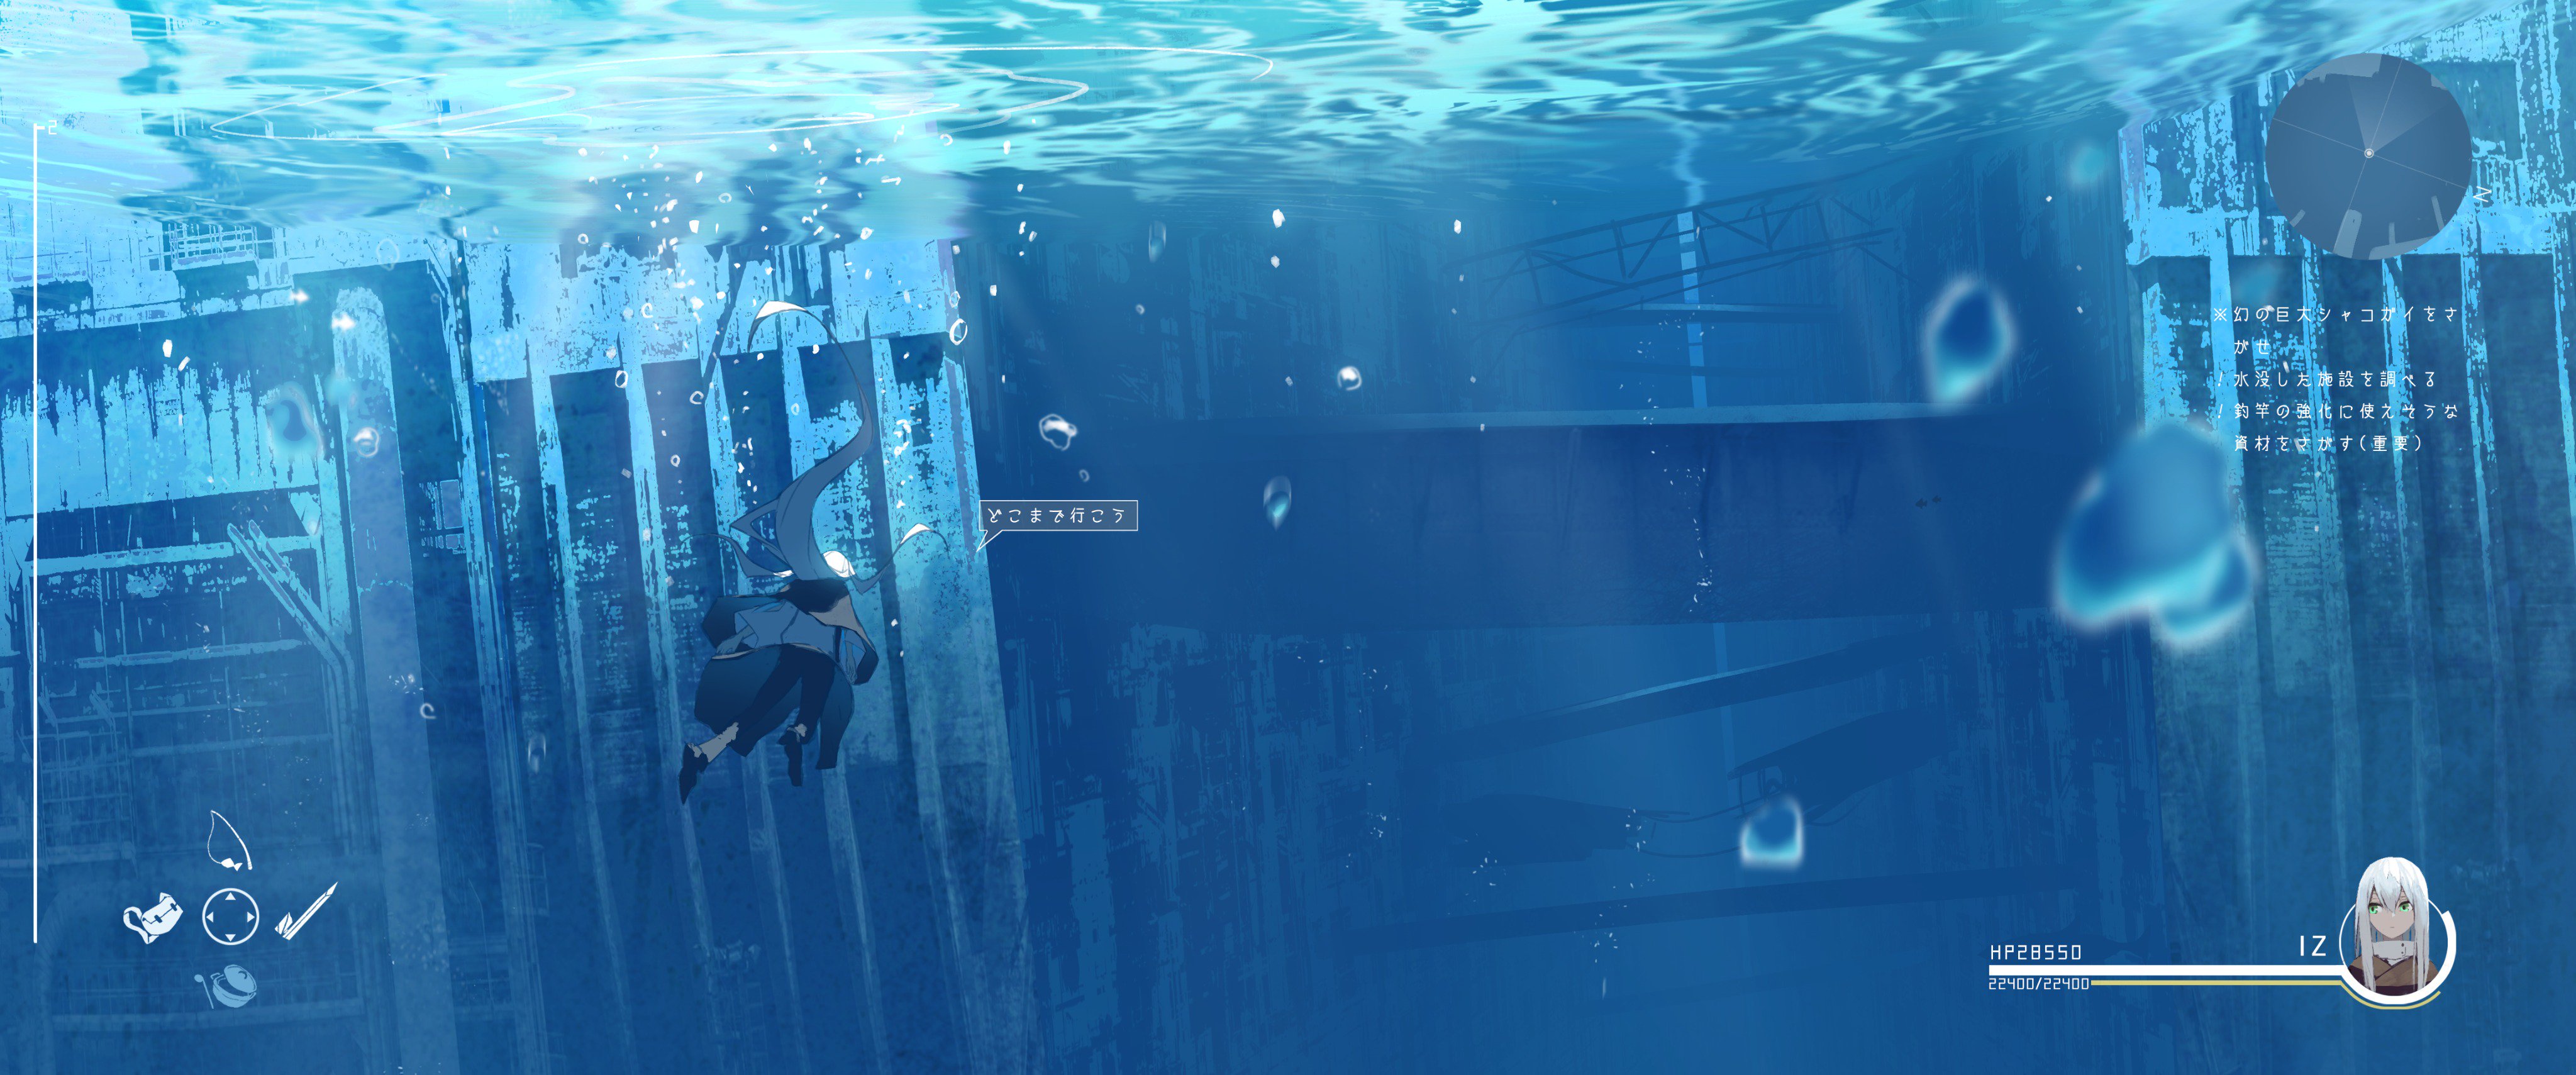 Anime Underwater Picture by あすてろid - Image Abyss